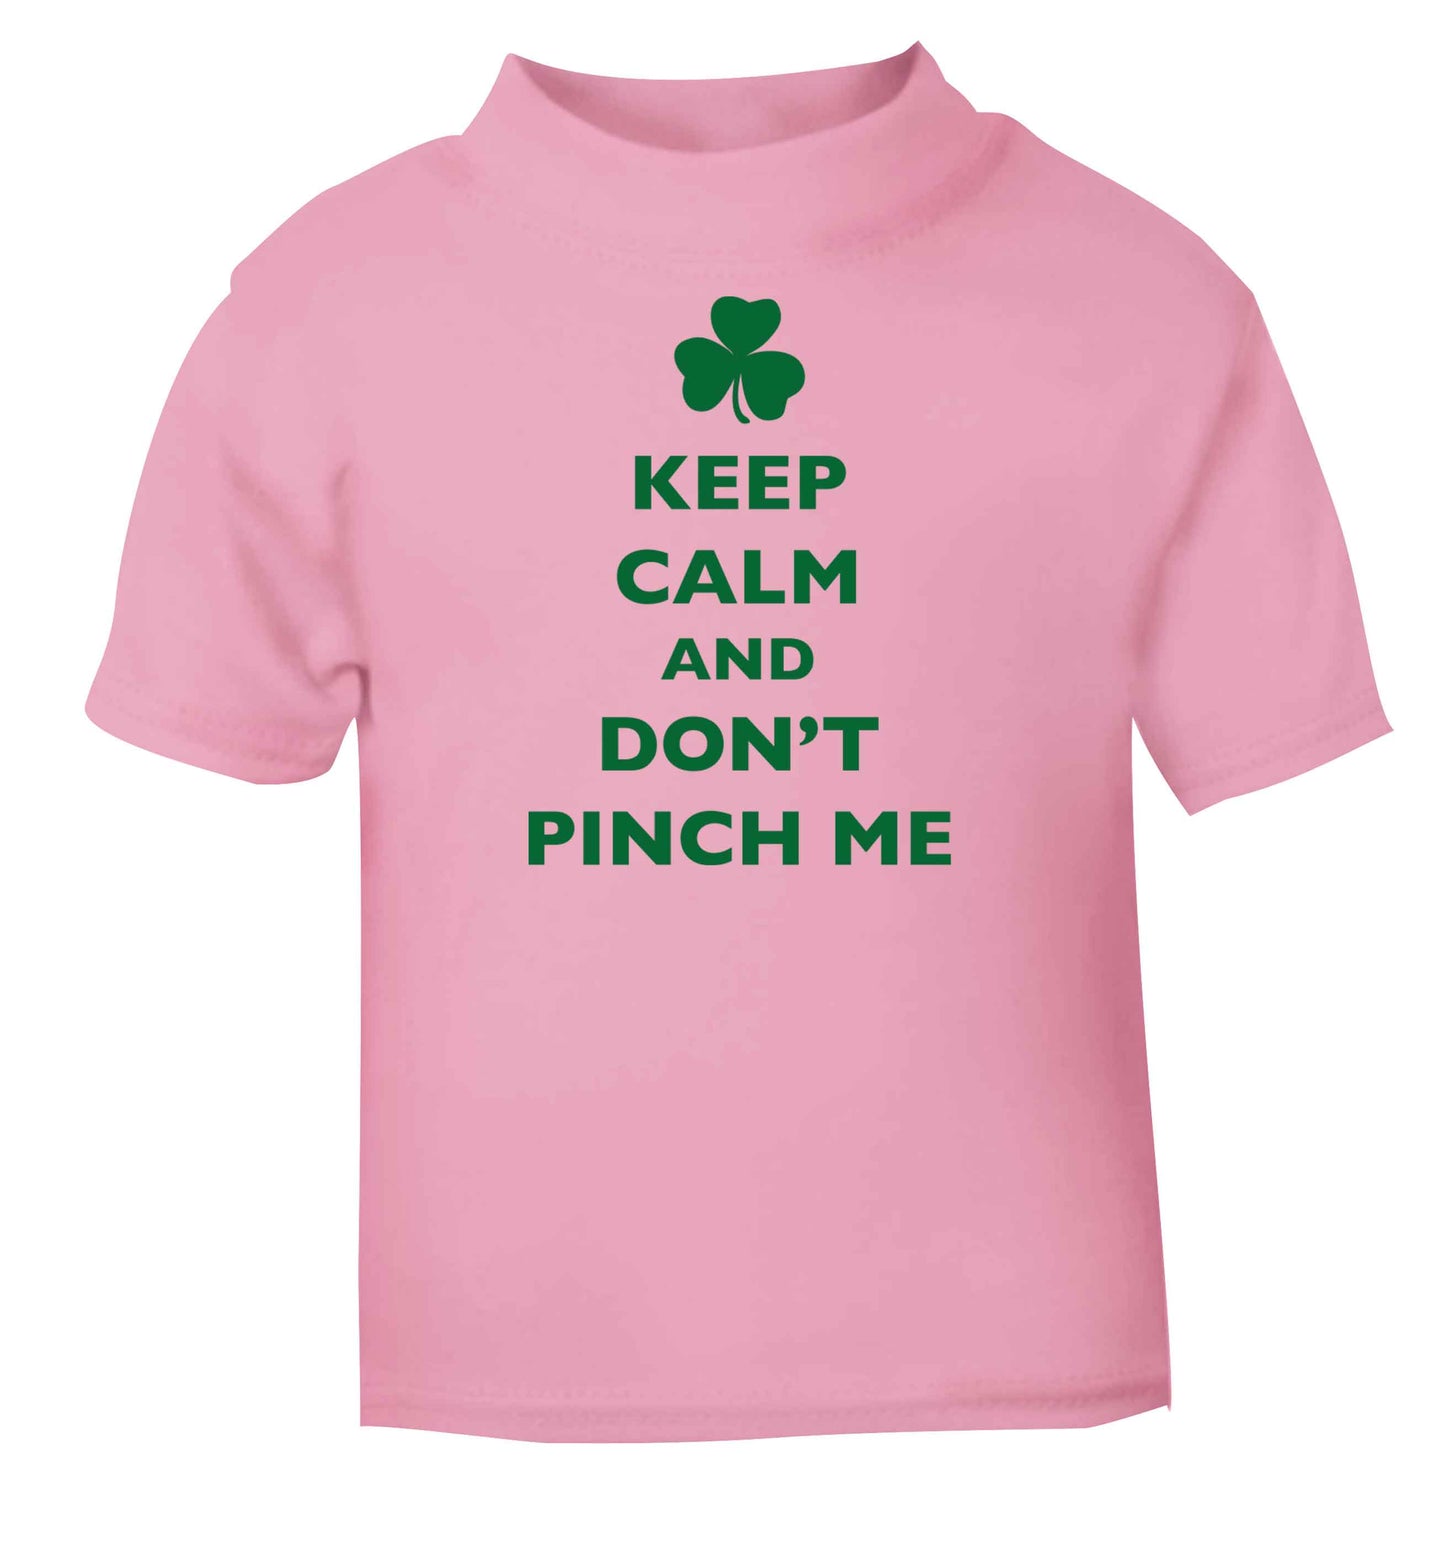 Keep calm and don't pinch me light pink baby toddler Tshirt 2 Years